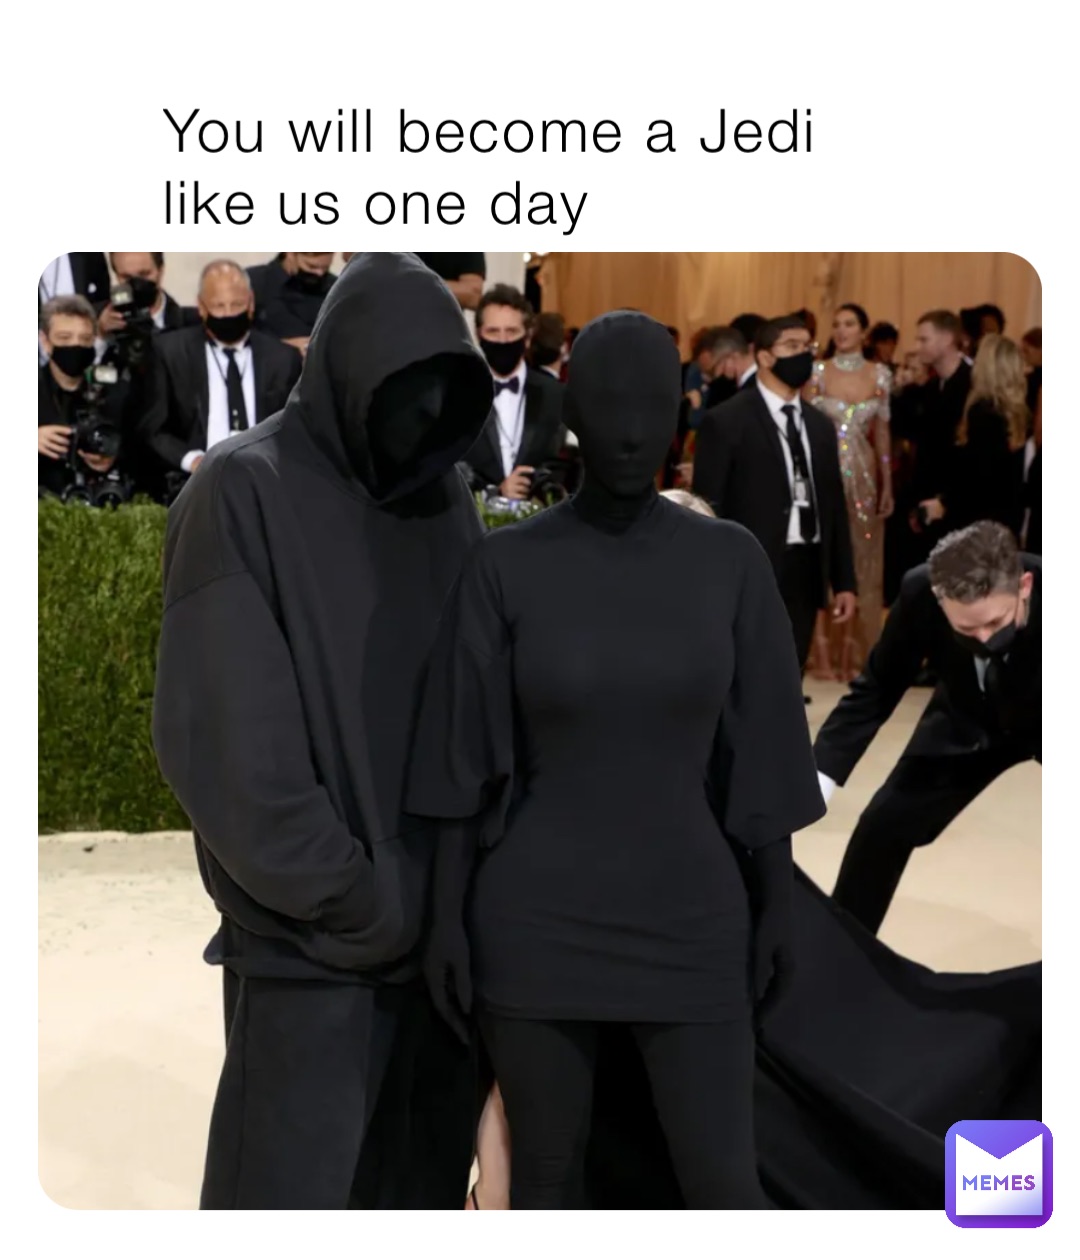 You will become a Jedi like us one day